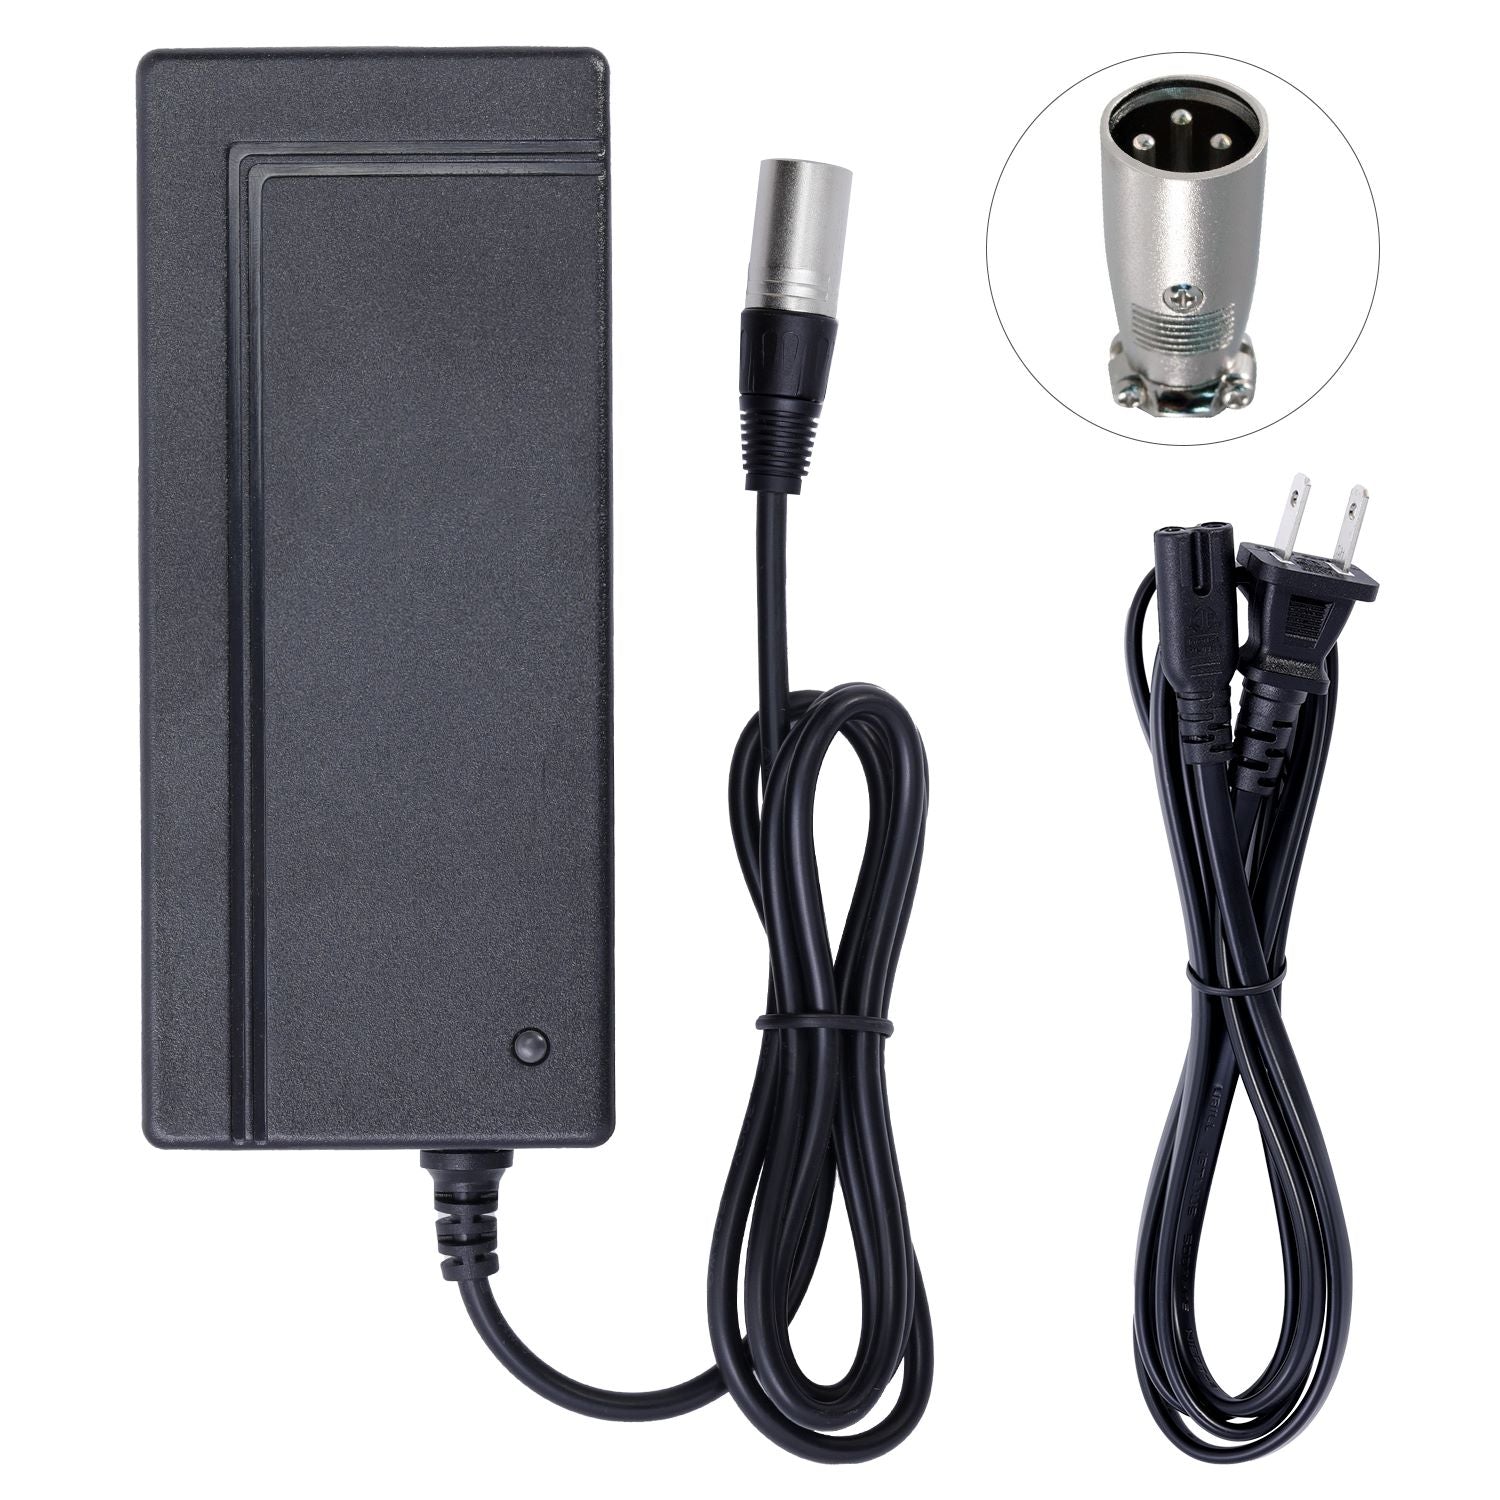 36V Charger for Uber Scoot Cruzz Electric Scooter.